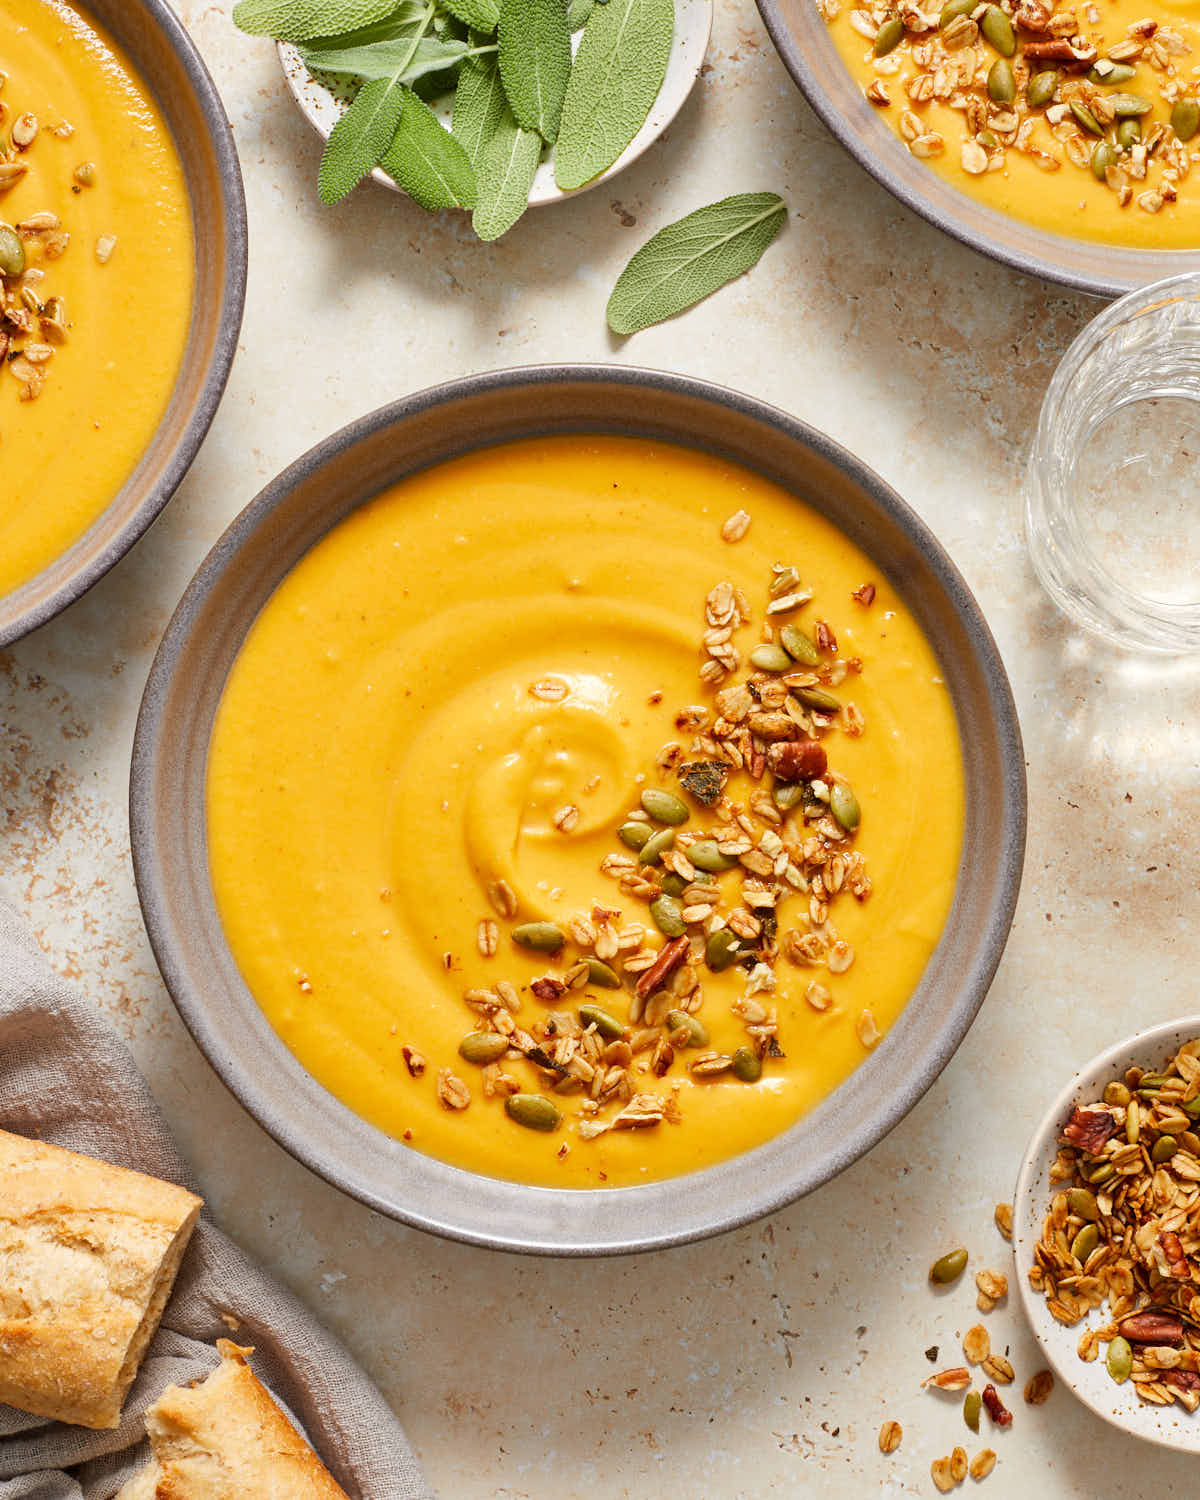 Bowls of squash and carrot soup next to bread, granola and sage.